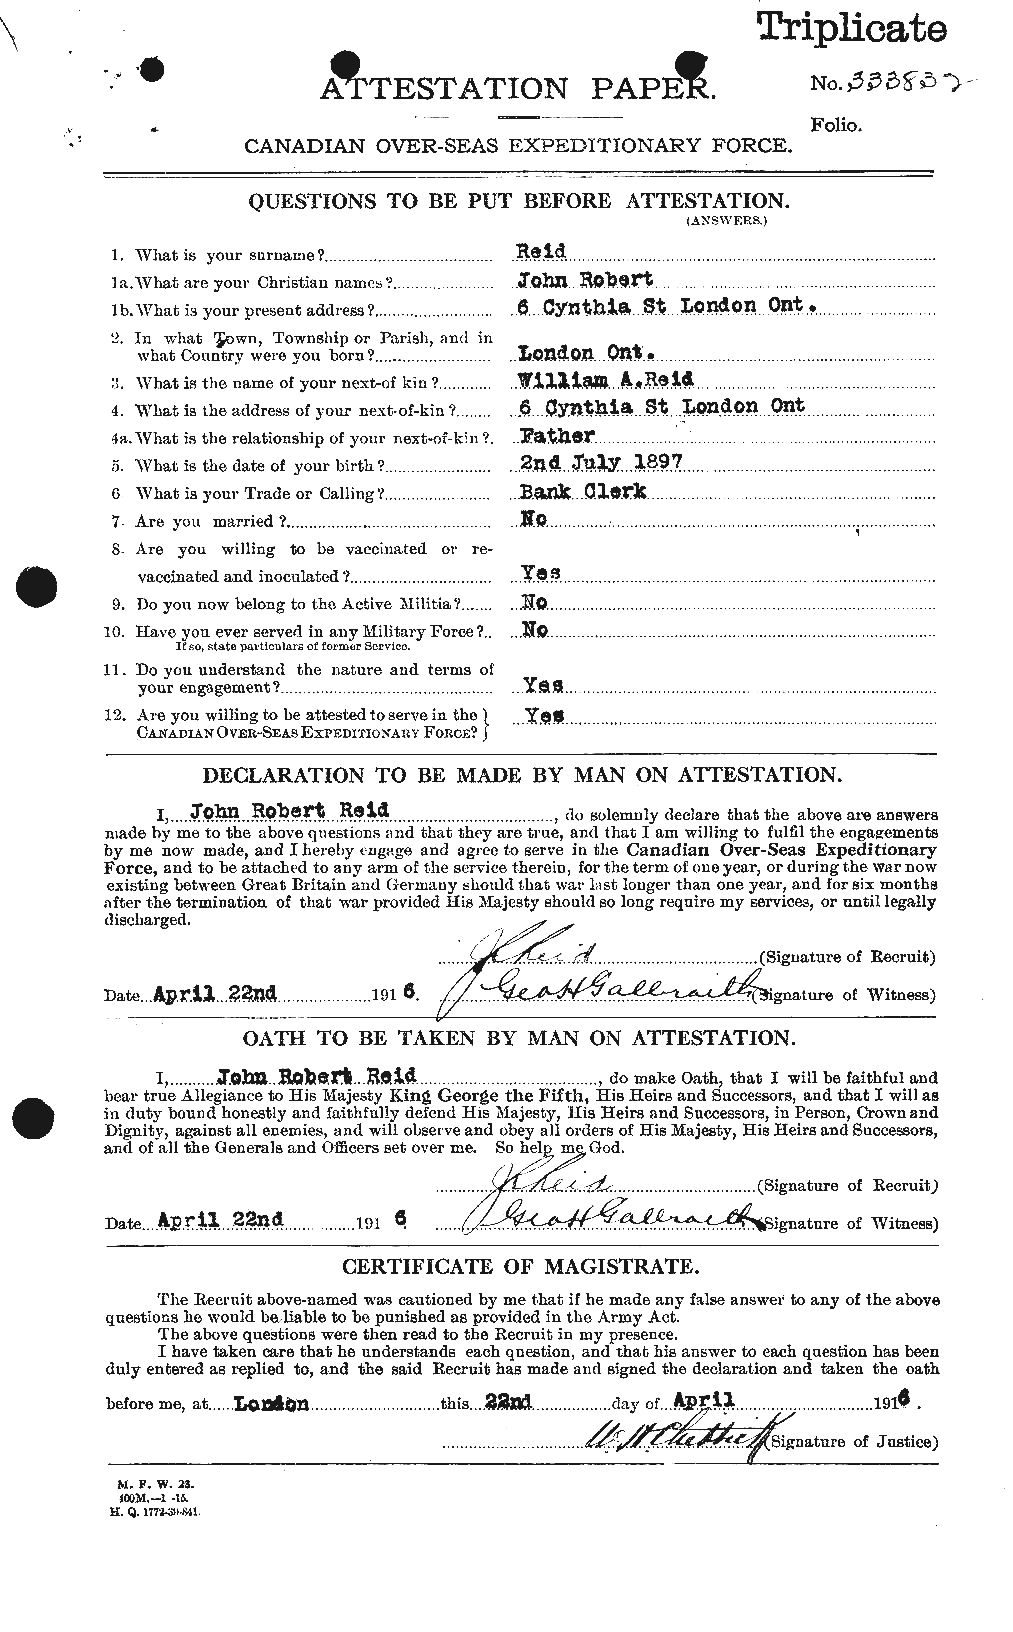 Personnel Records of the First World War - CEF 598864a